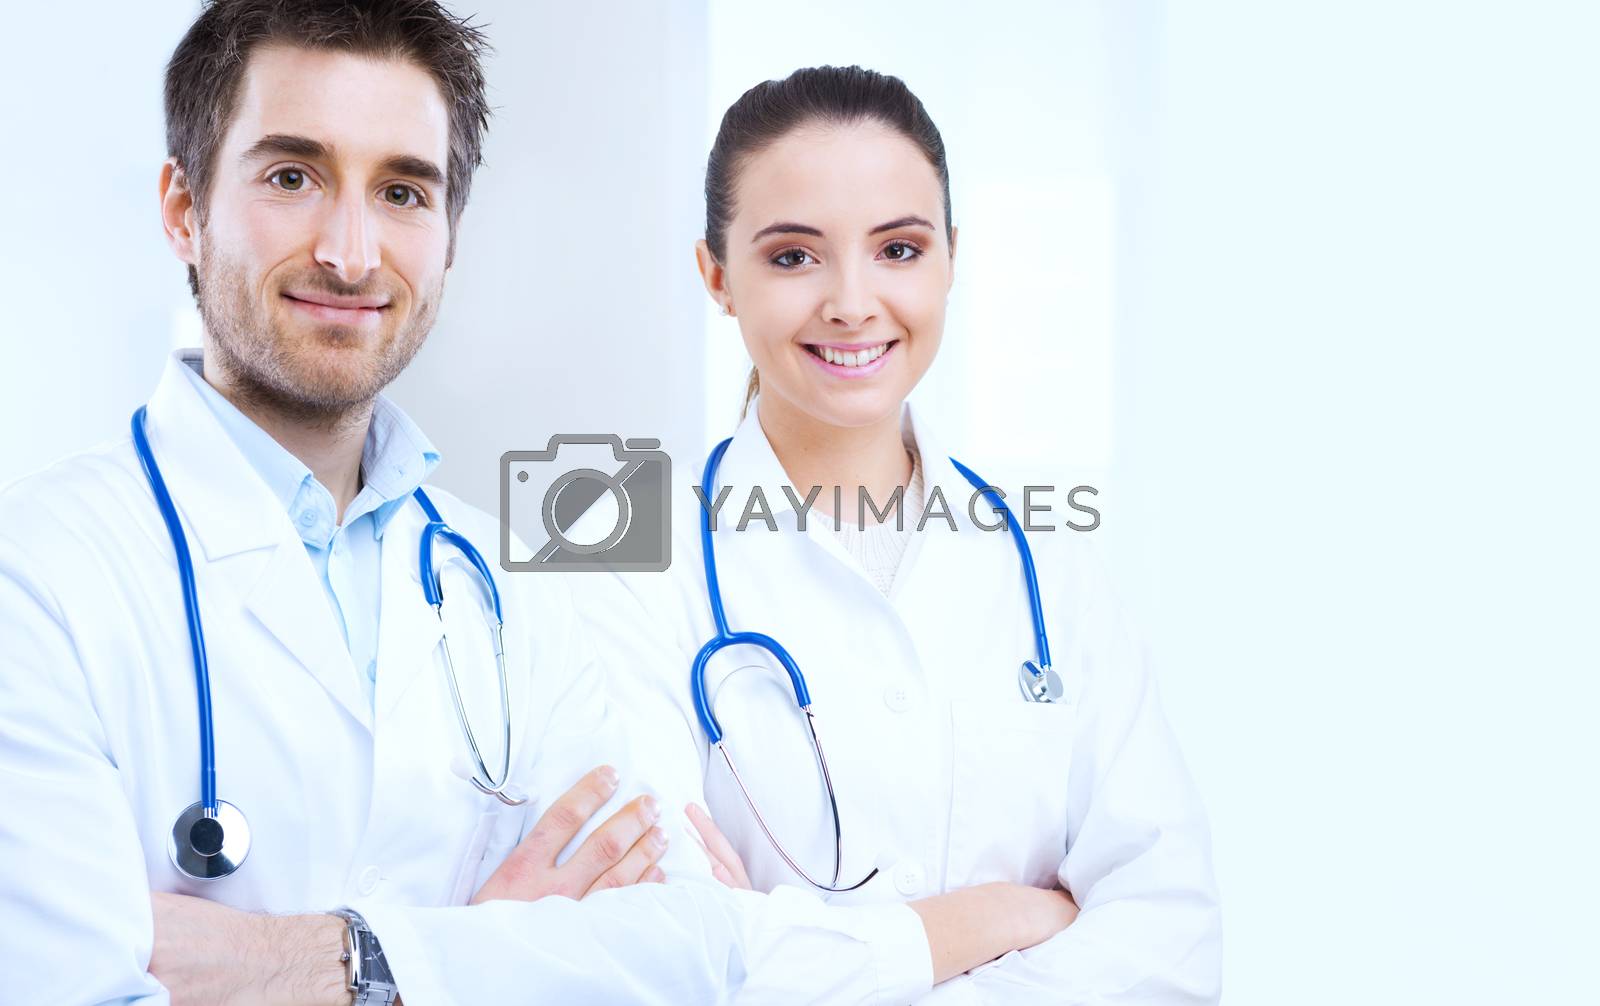 Royalty free image of Smiling doctor by stokkete